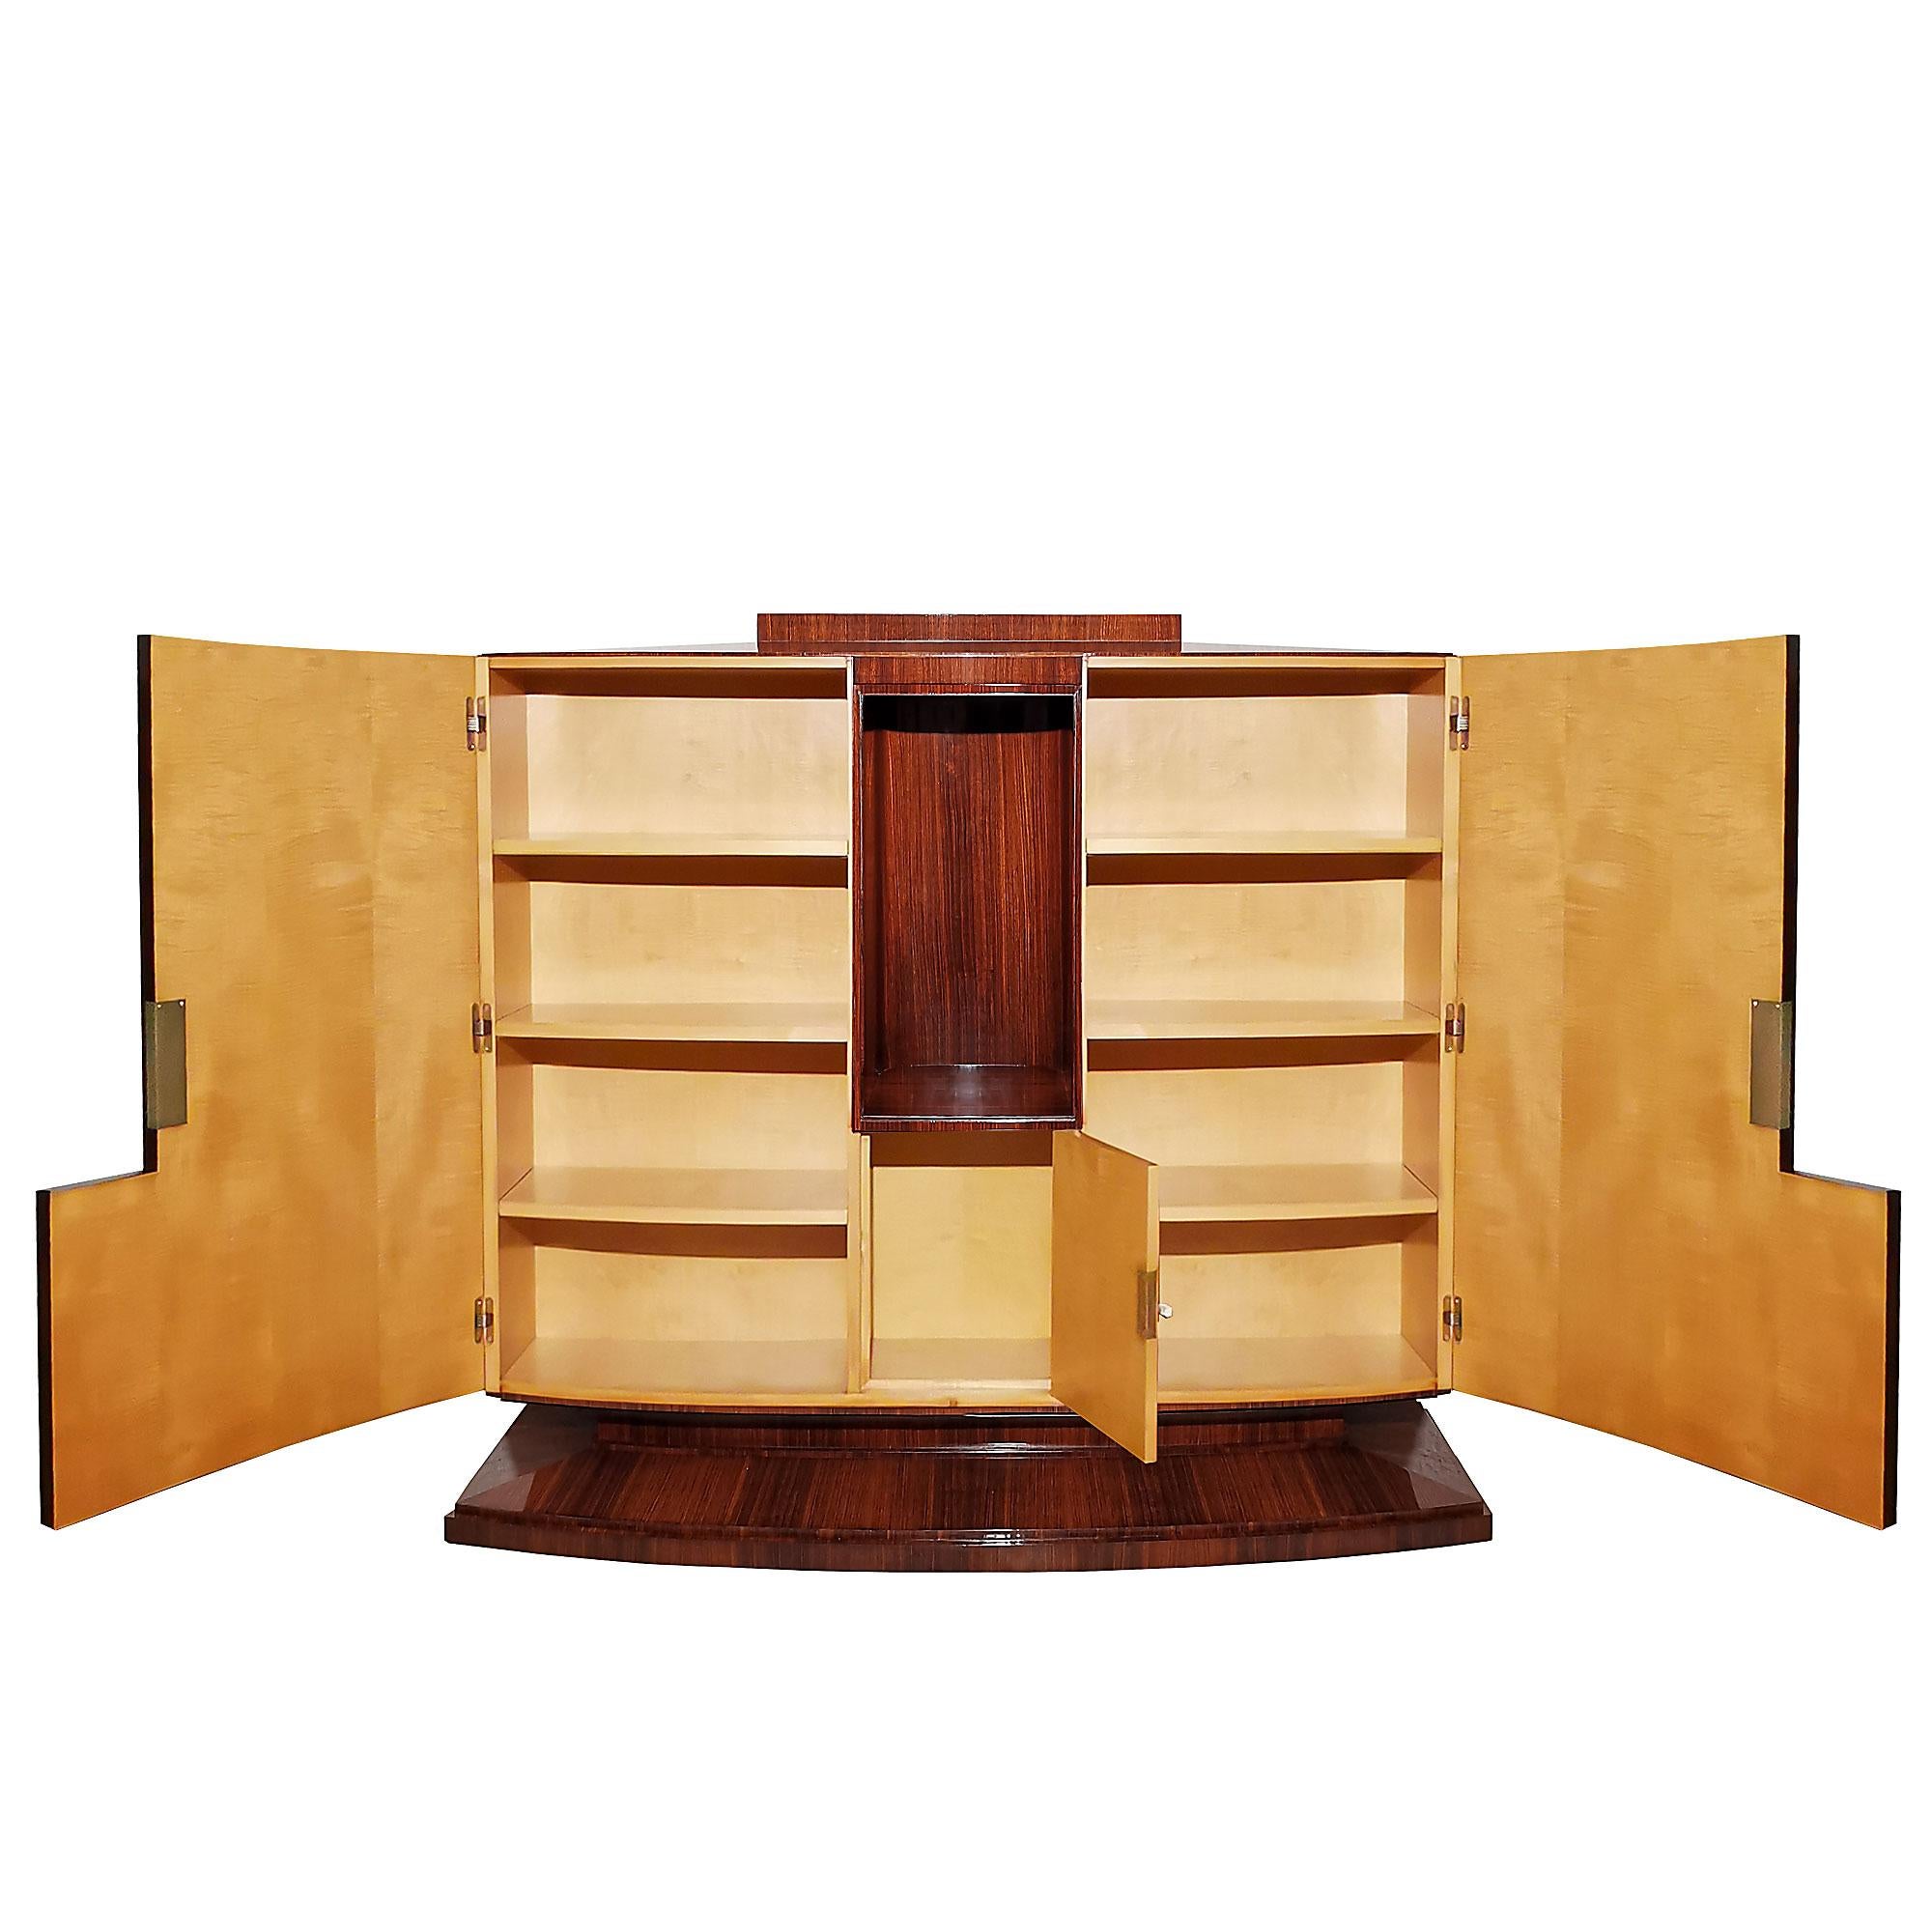 French Art Deco Storage Cabinet, Mahogany, Sycamore, Curved Doors, Shelves - France For Sale